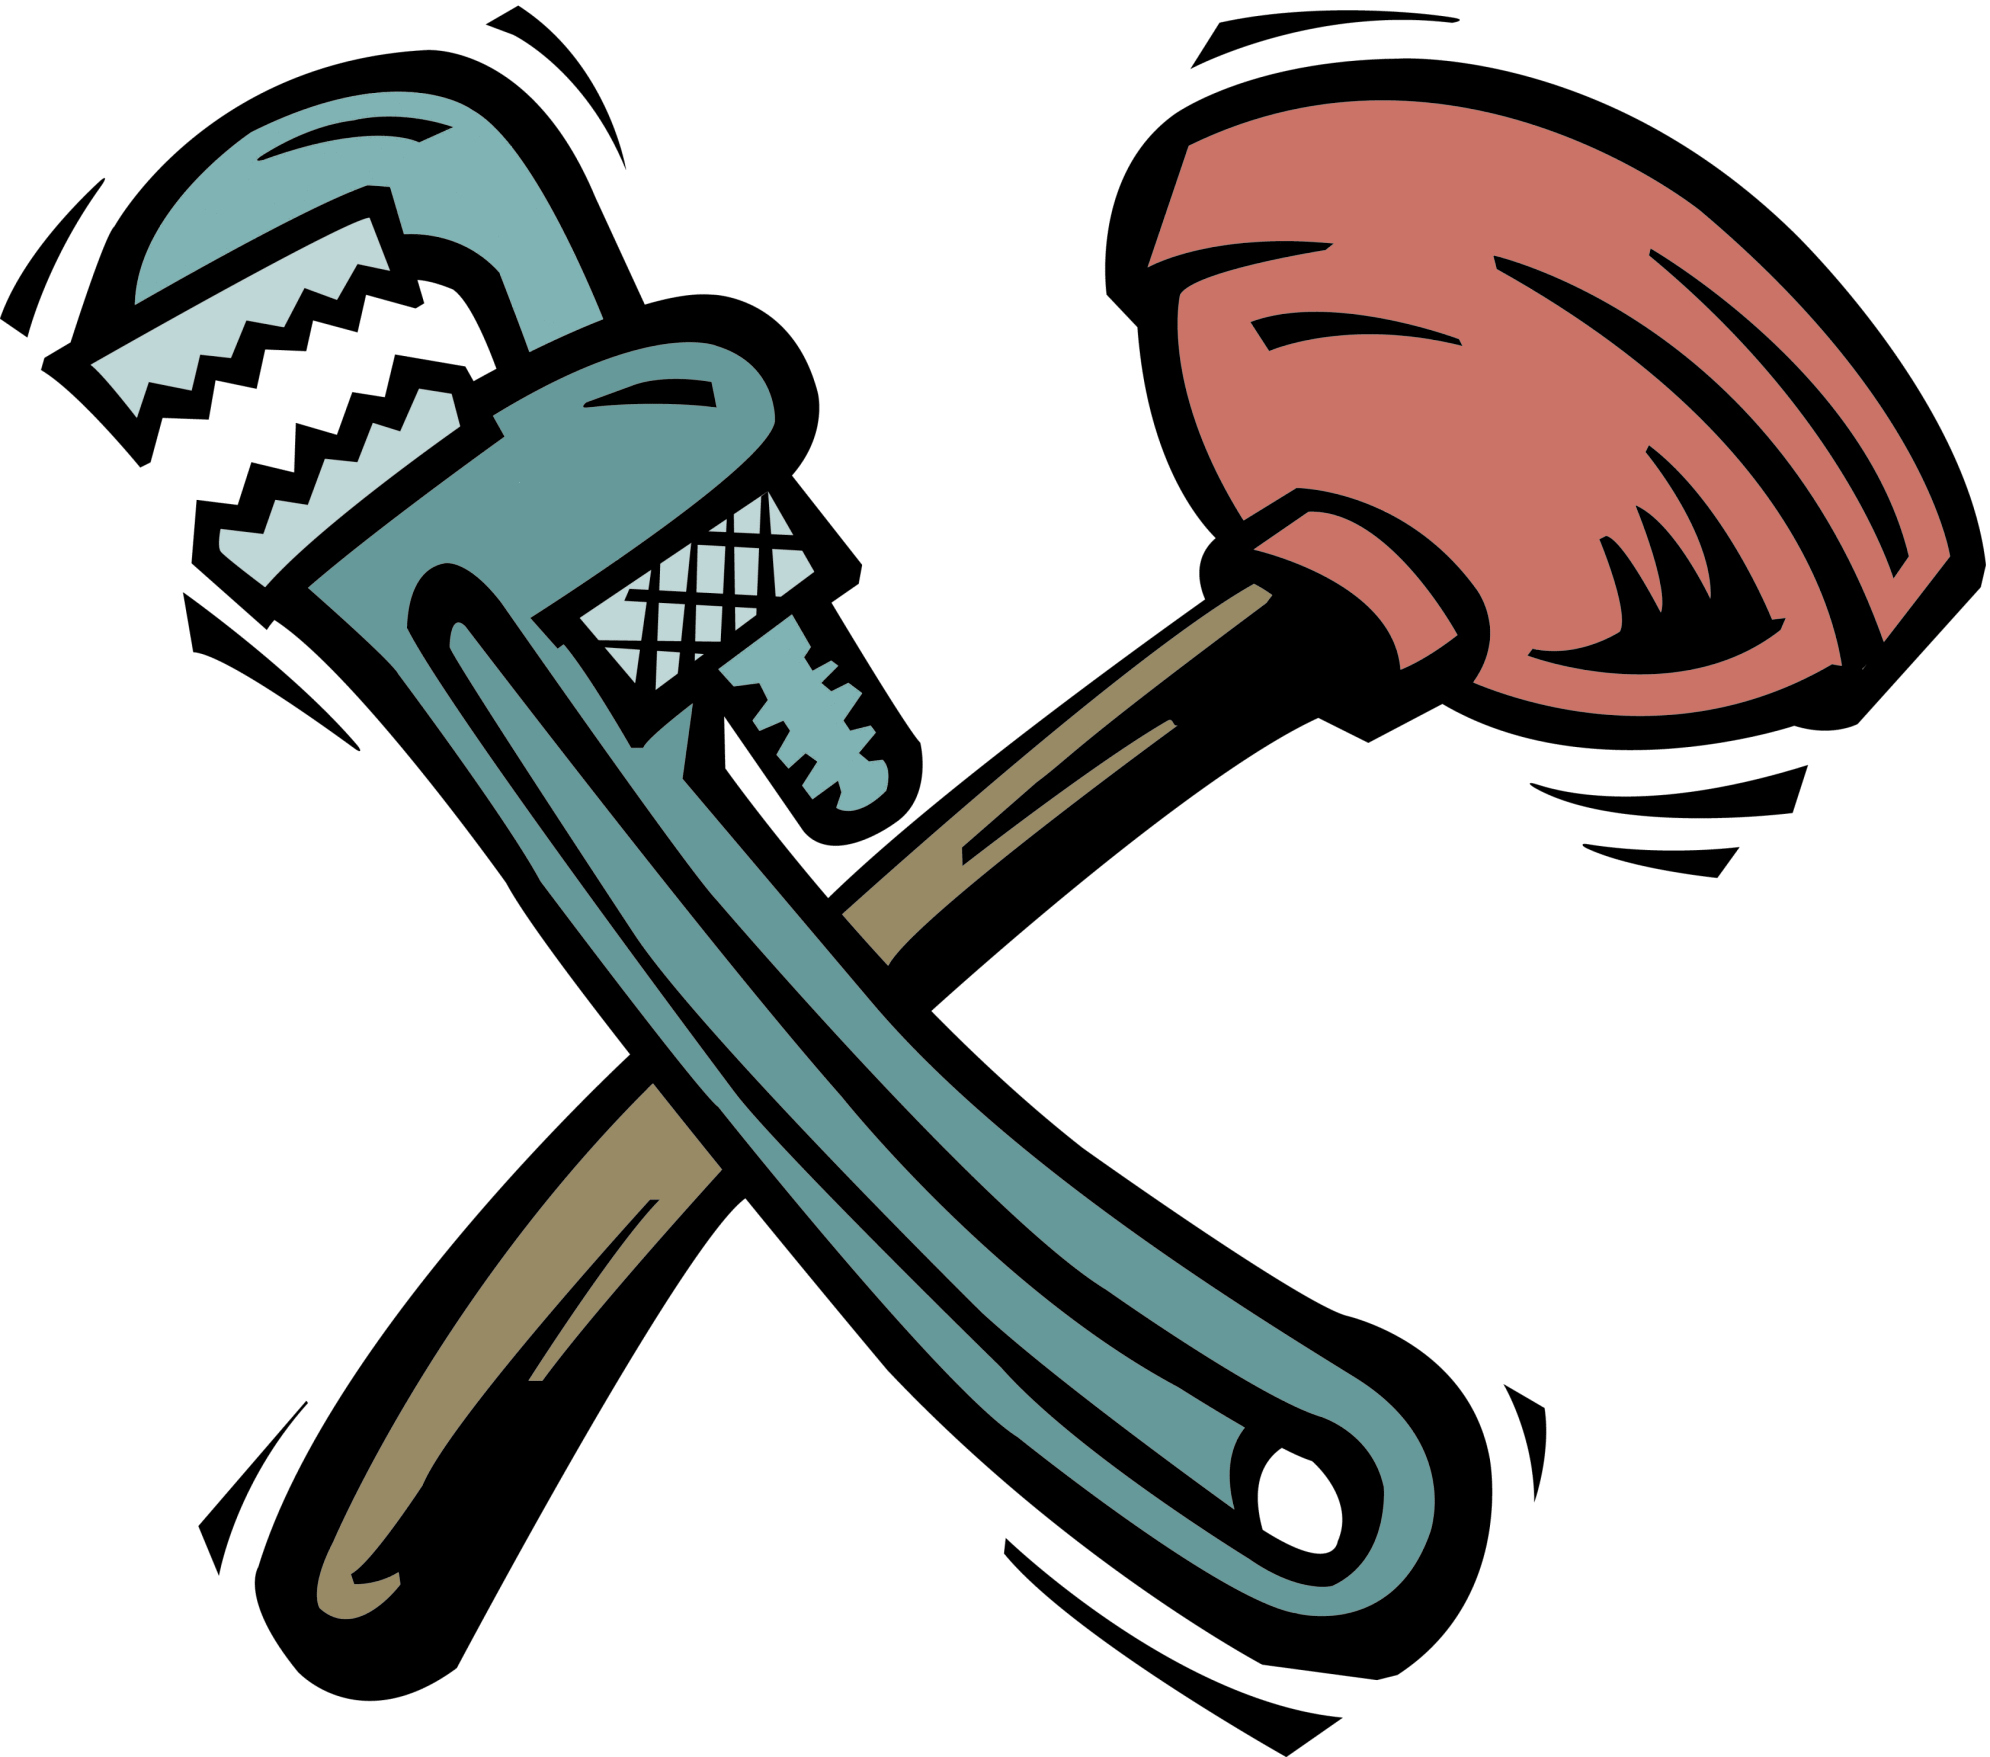 plumbing wrench clipart